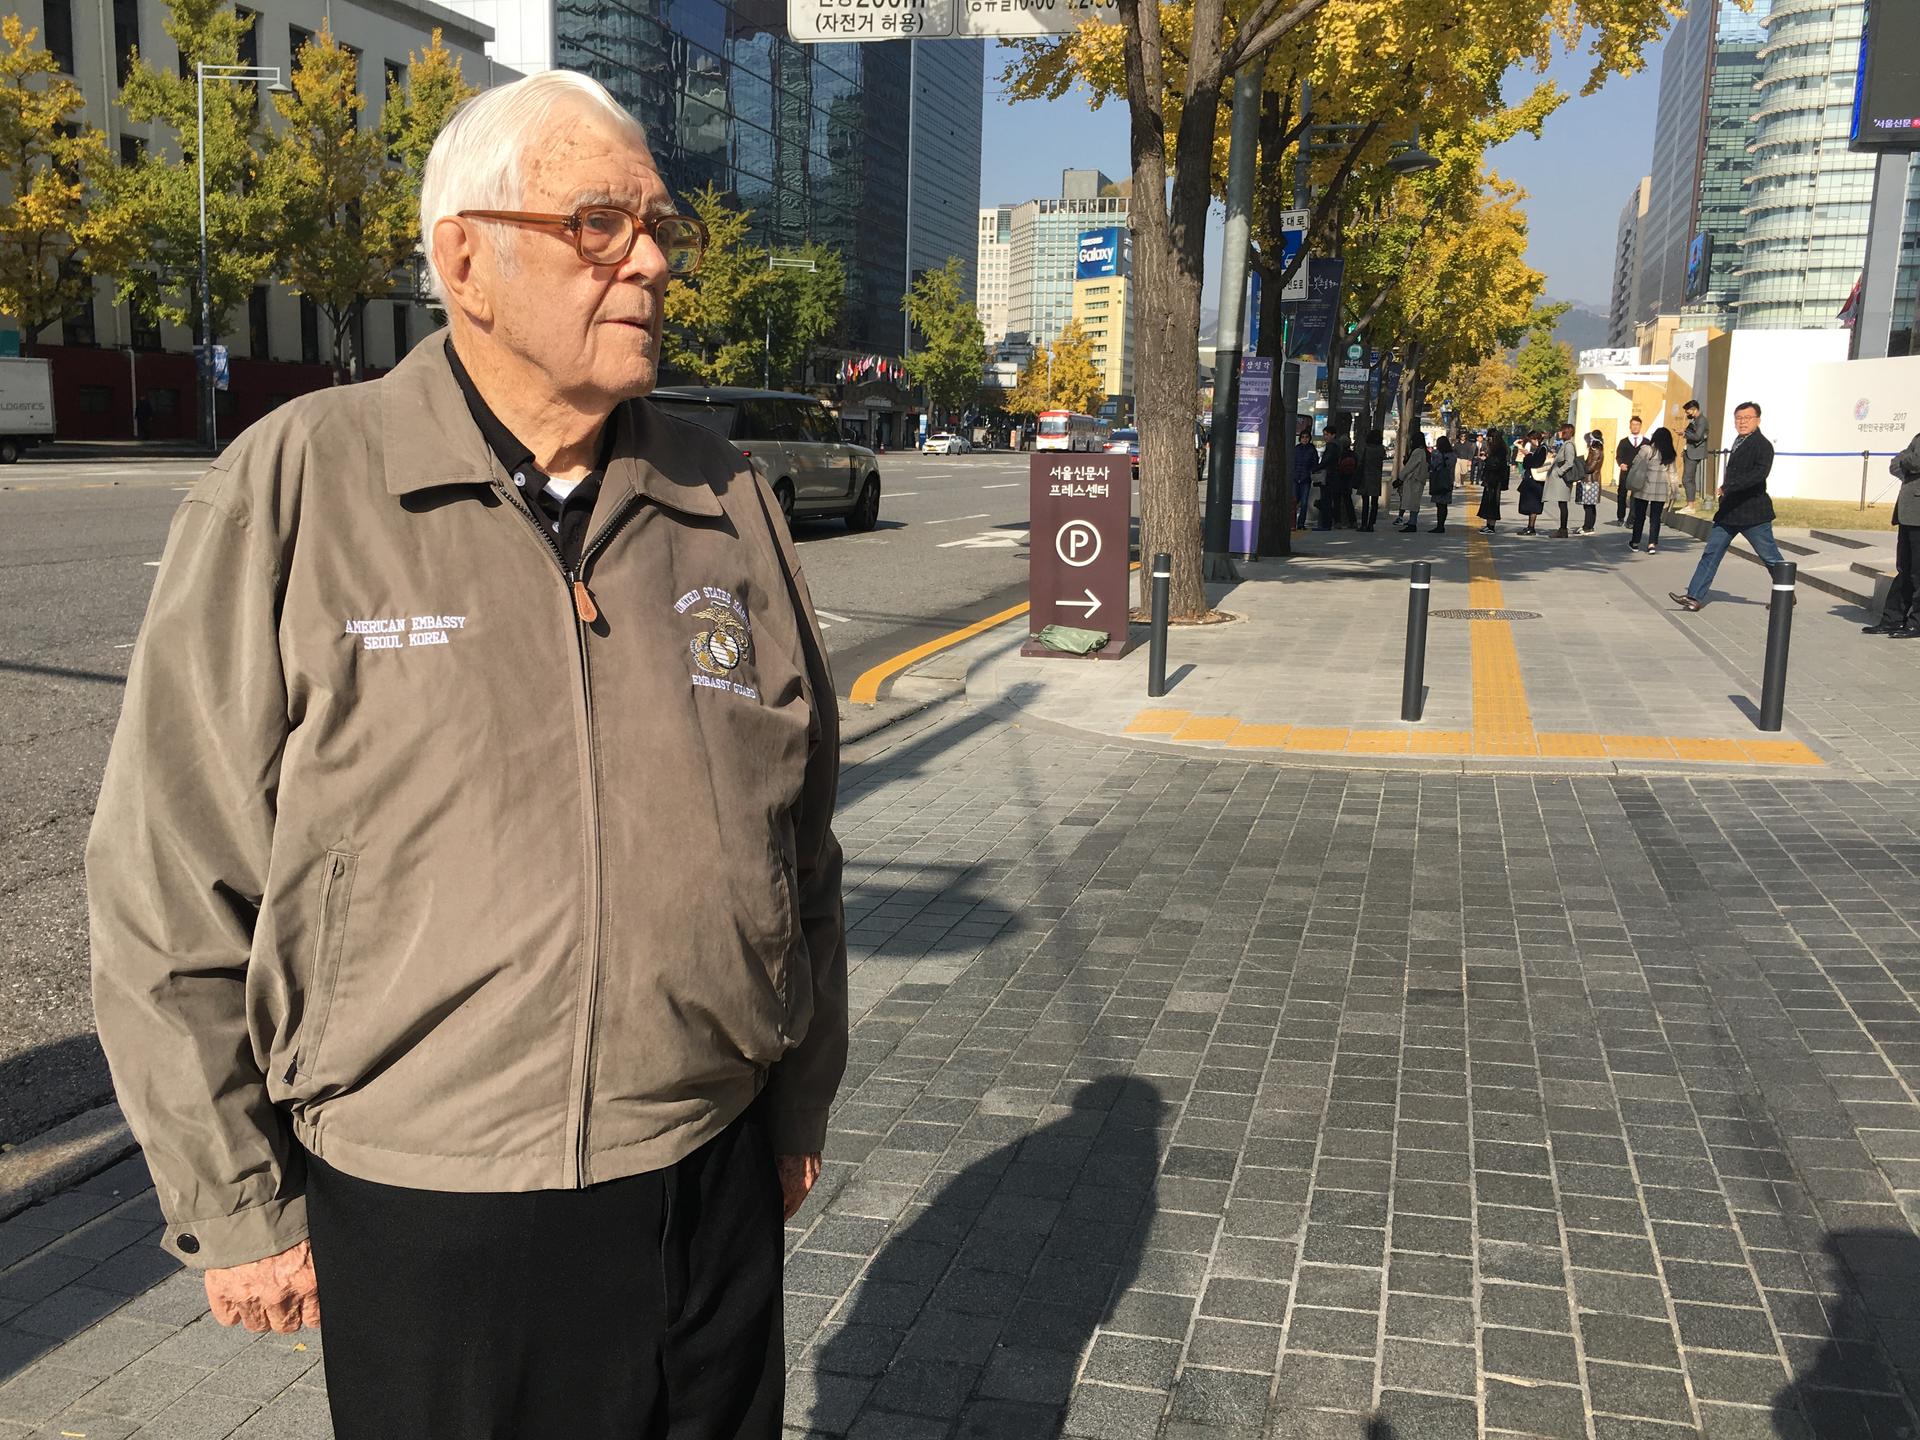 George Lampman in Seoul in 2017. The city has changed a lot since he first arrived there as a young marine in 1949.